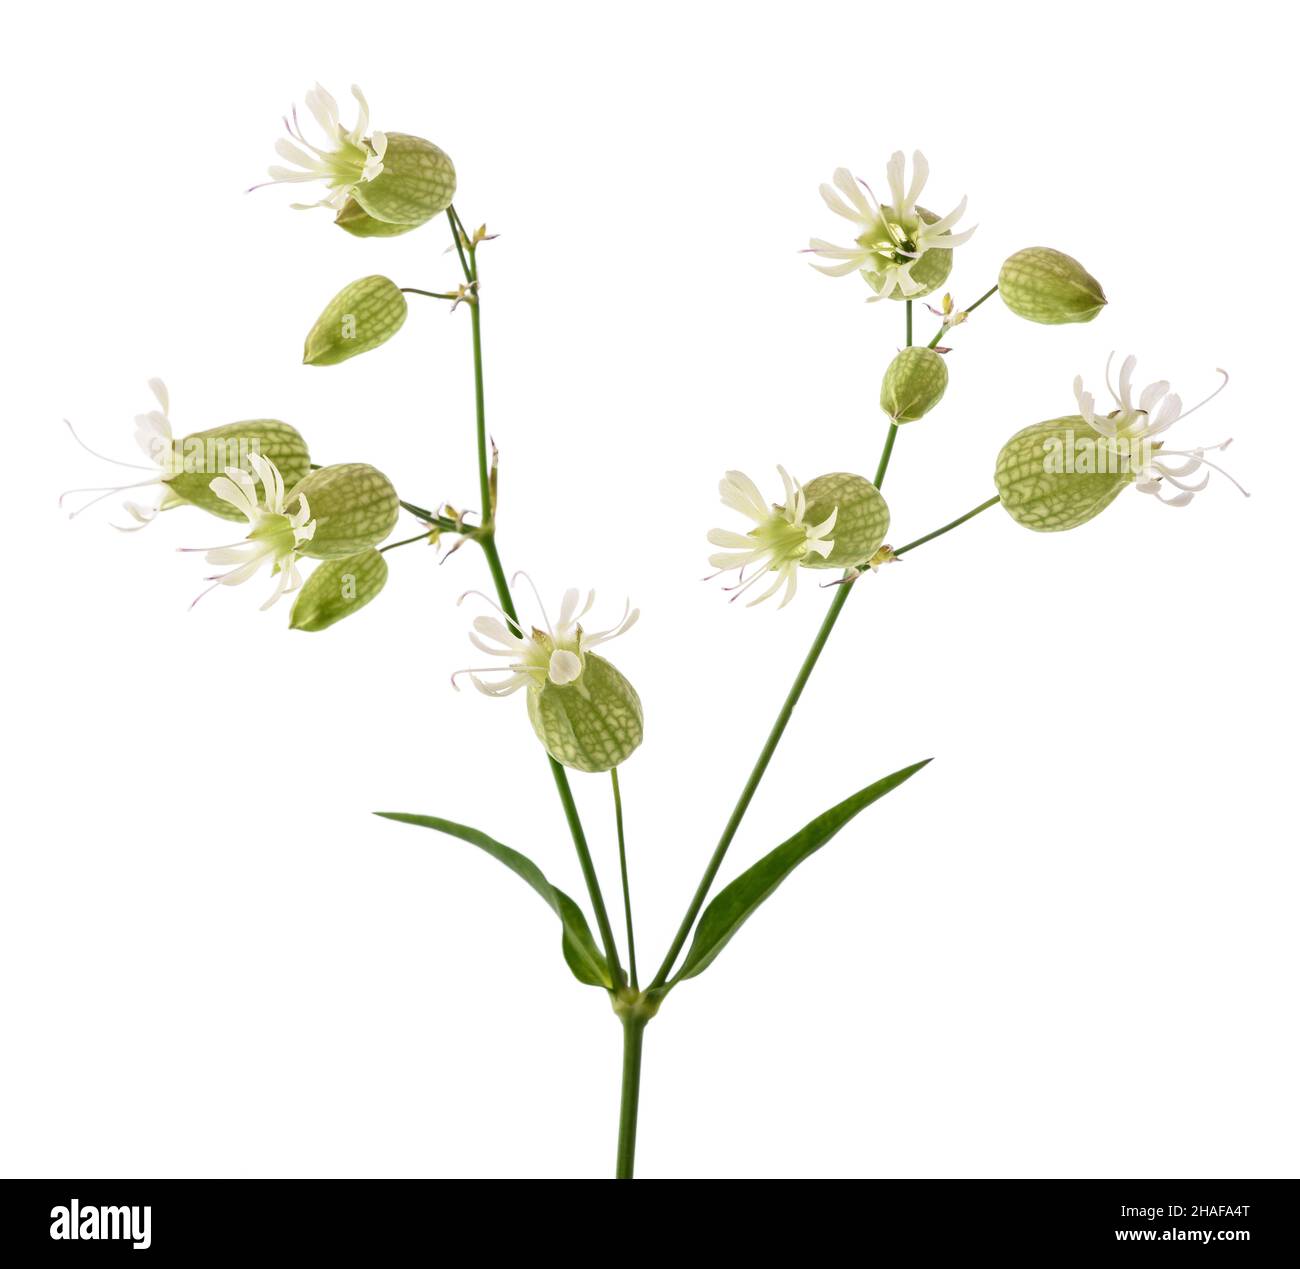 Bladder campion flowers  isolated on white Stock Photo